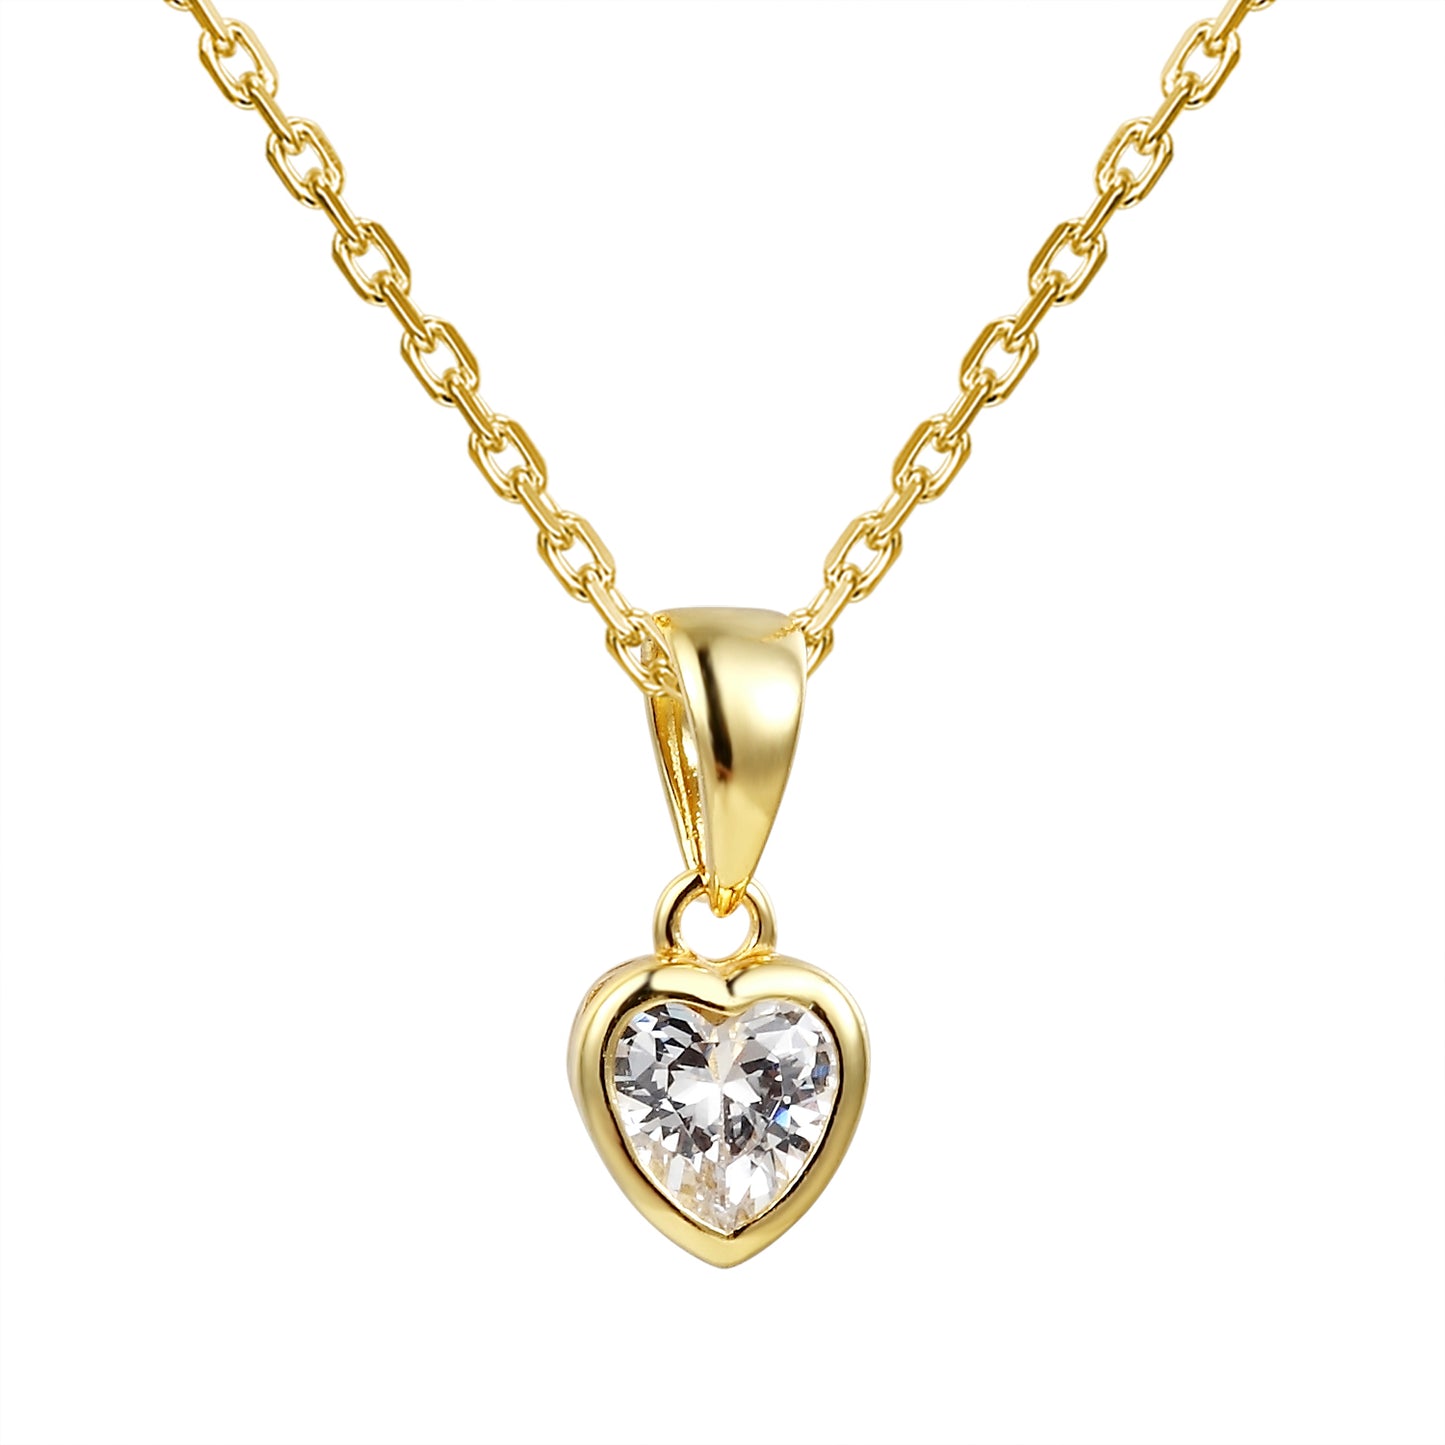 Small Heart Crystal Solitaire Pendant Chain Valentine's Set